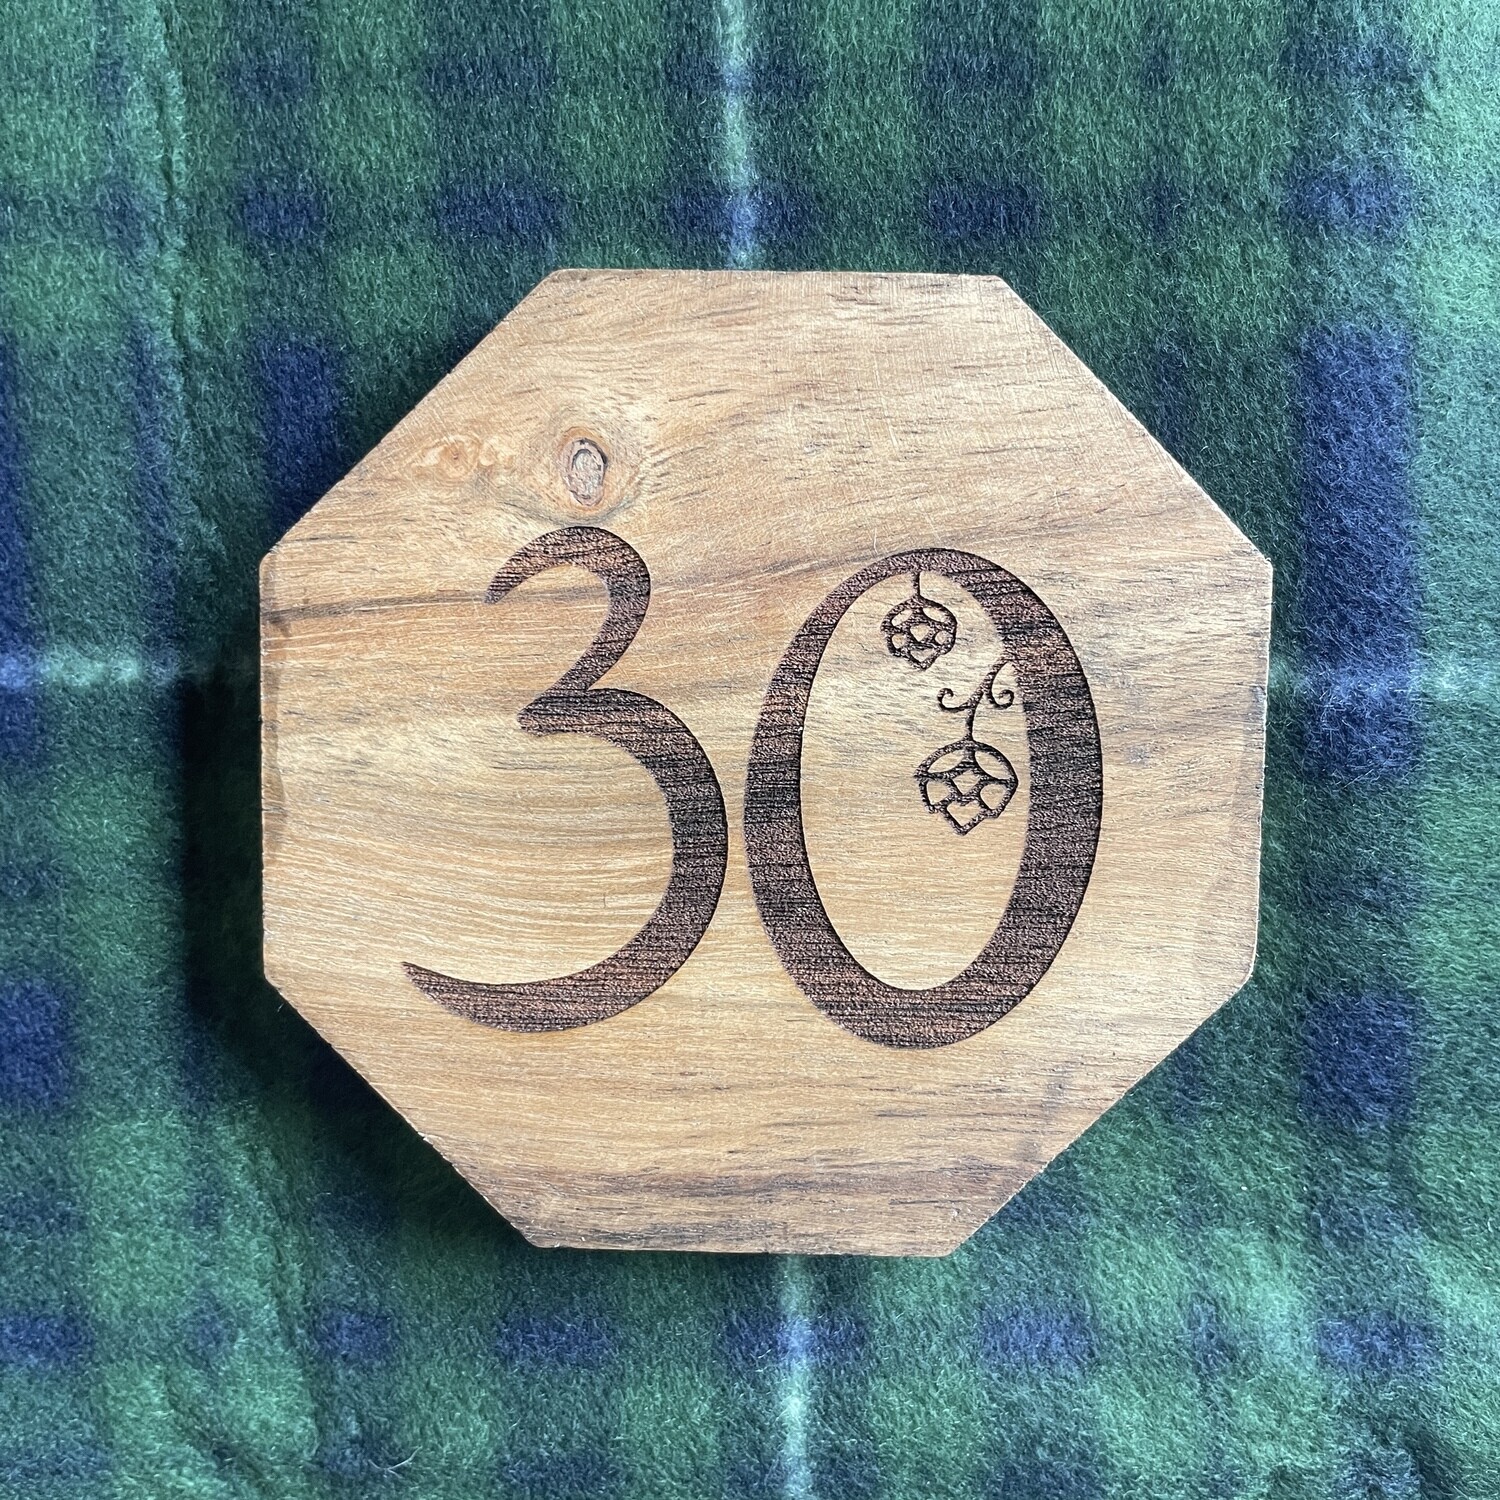 30th Vermont Brewers Festival Wooden Coaster